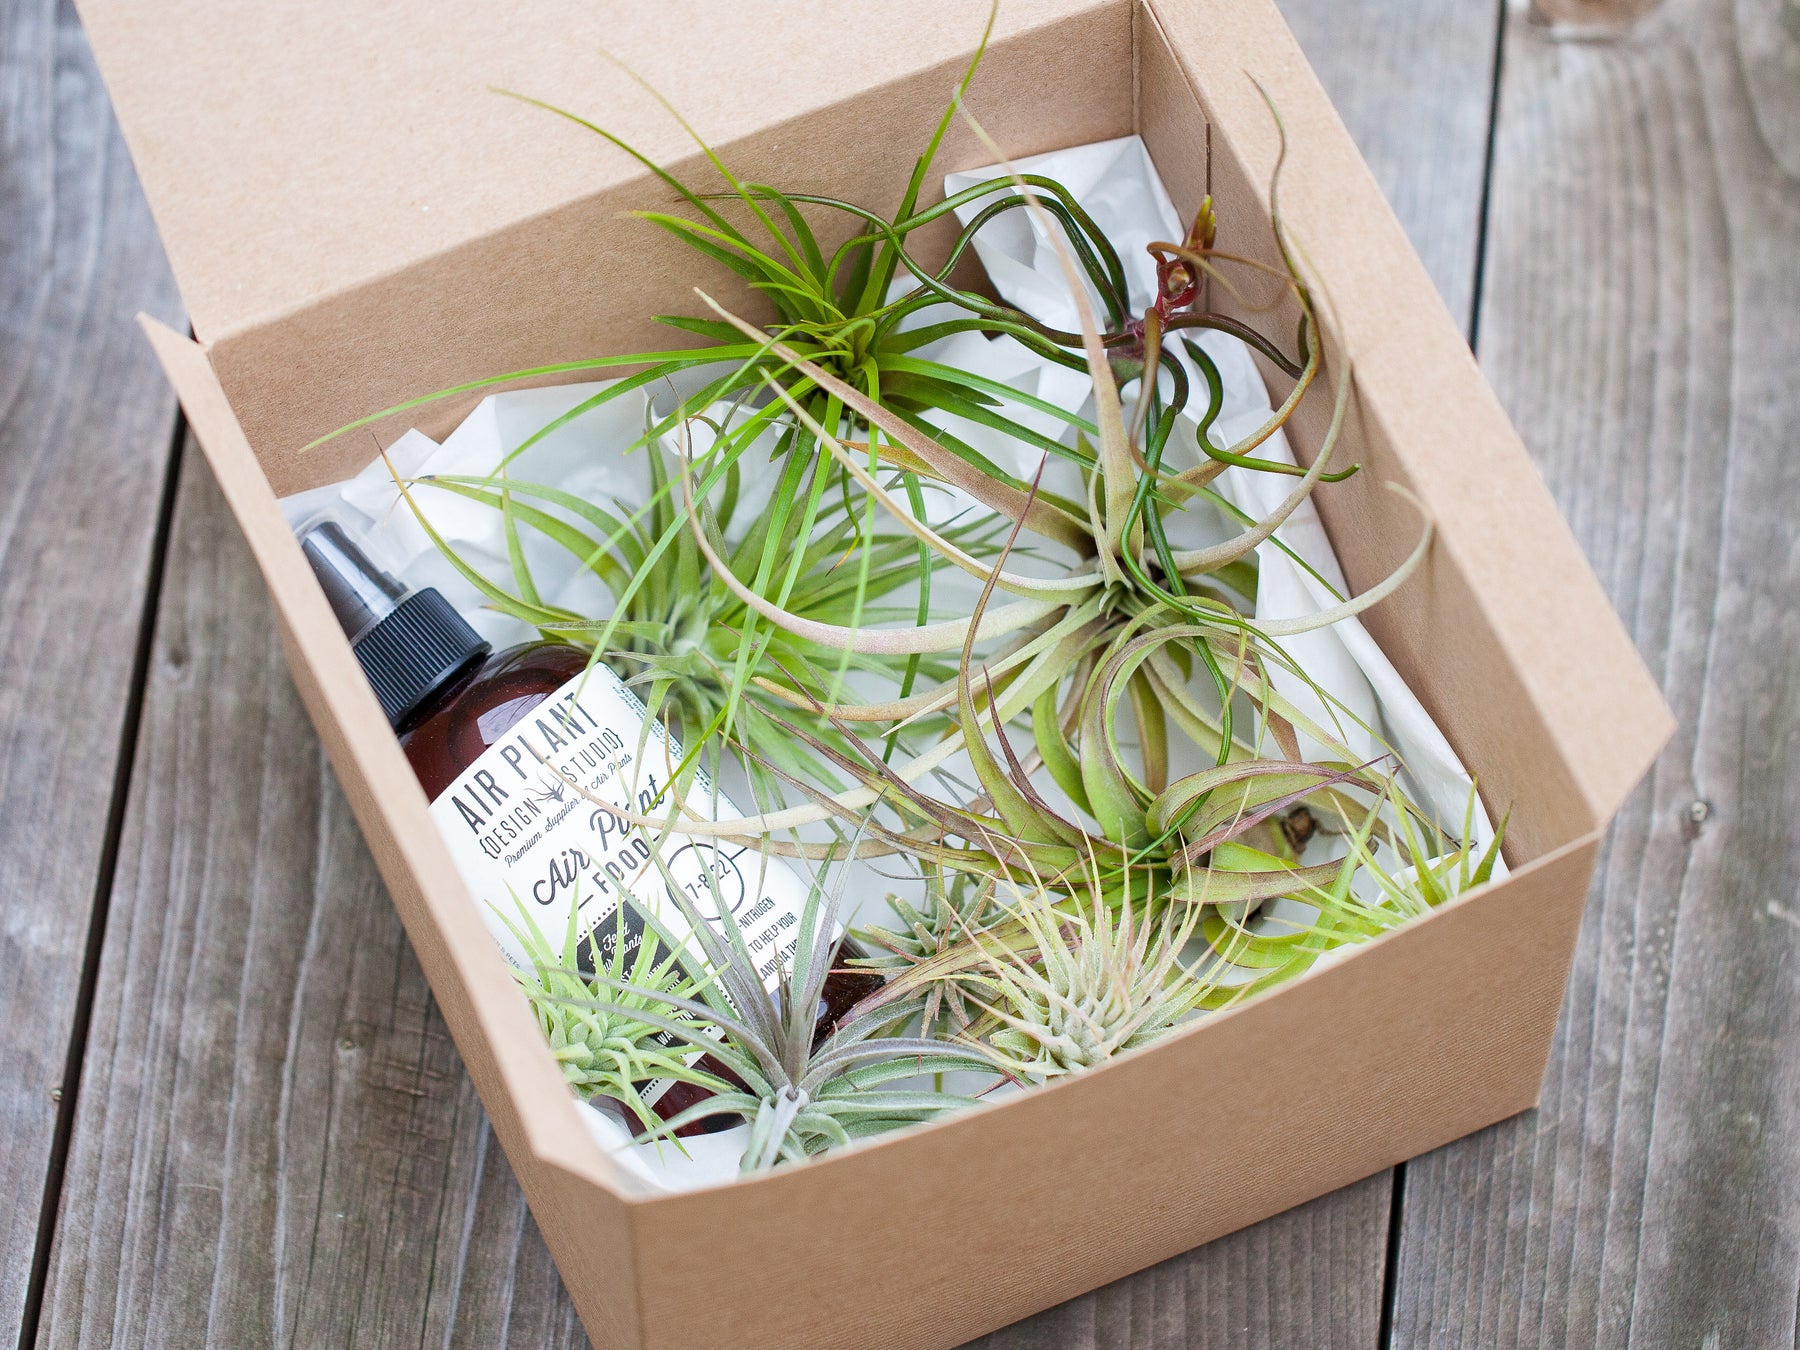 Assorted Tillandsia Air Plants and Ready to Use Fertilizer in a Gift Box